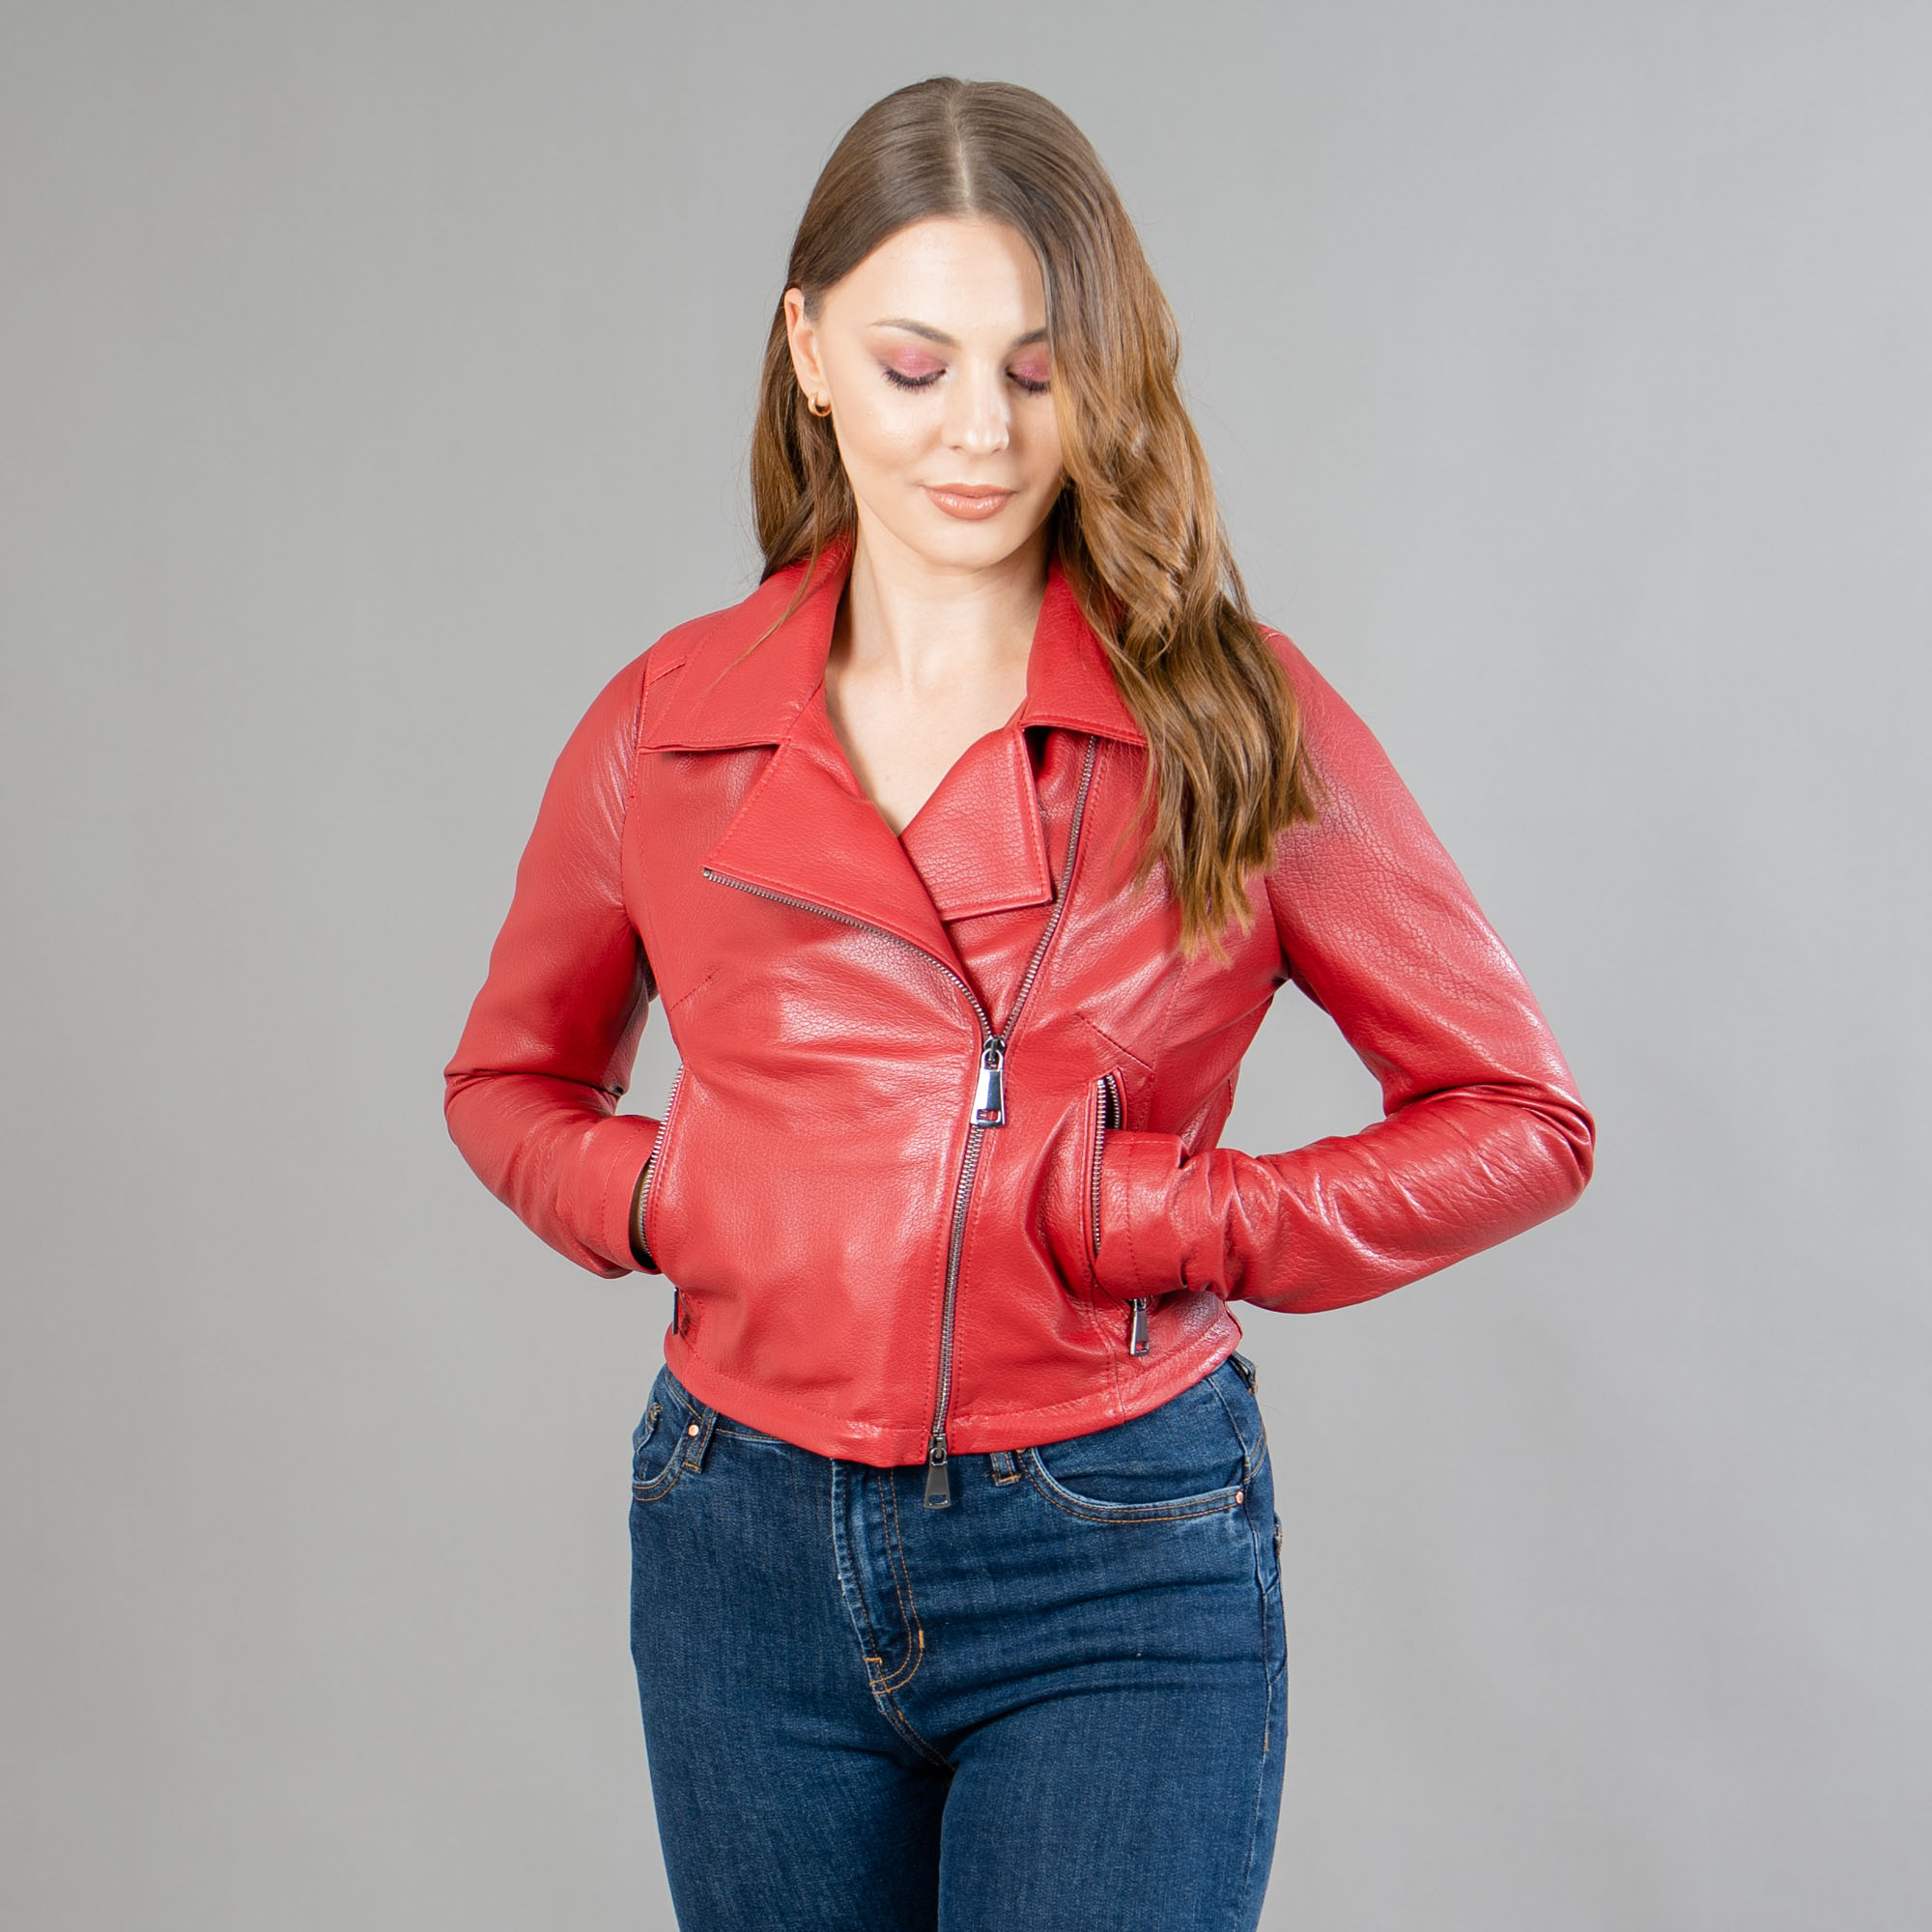 Short red leather jacket